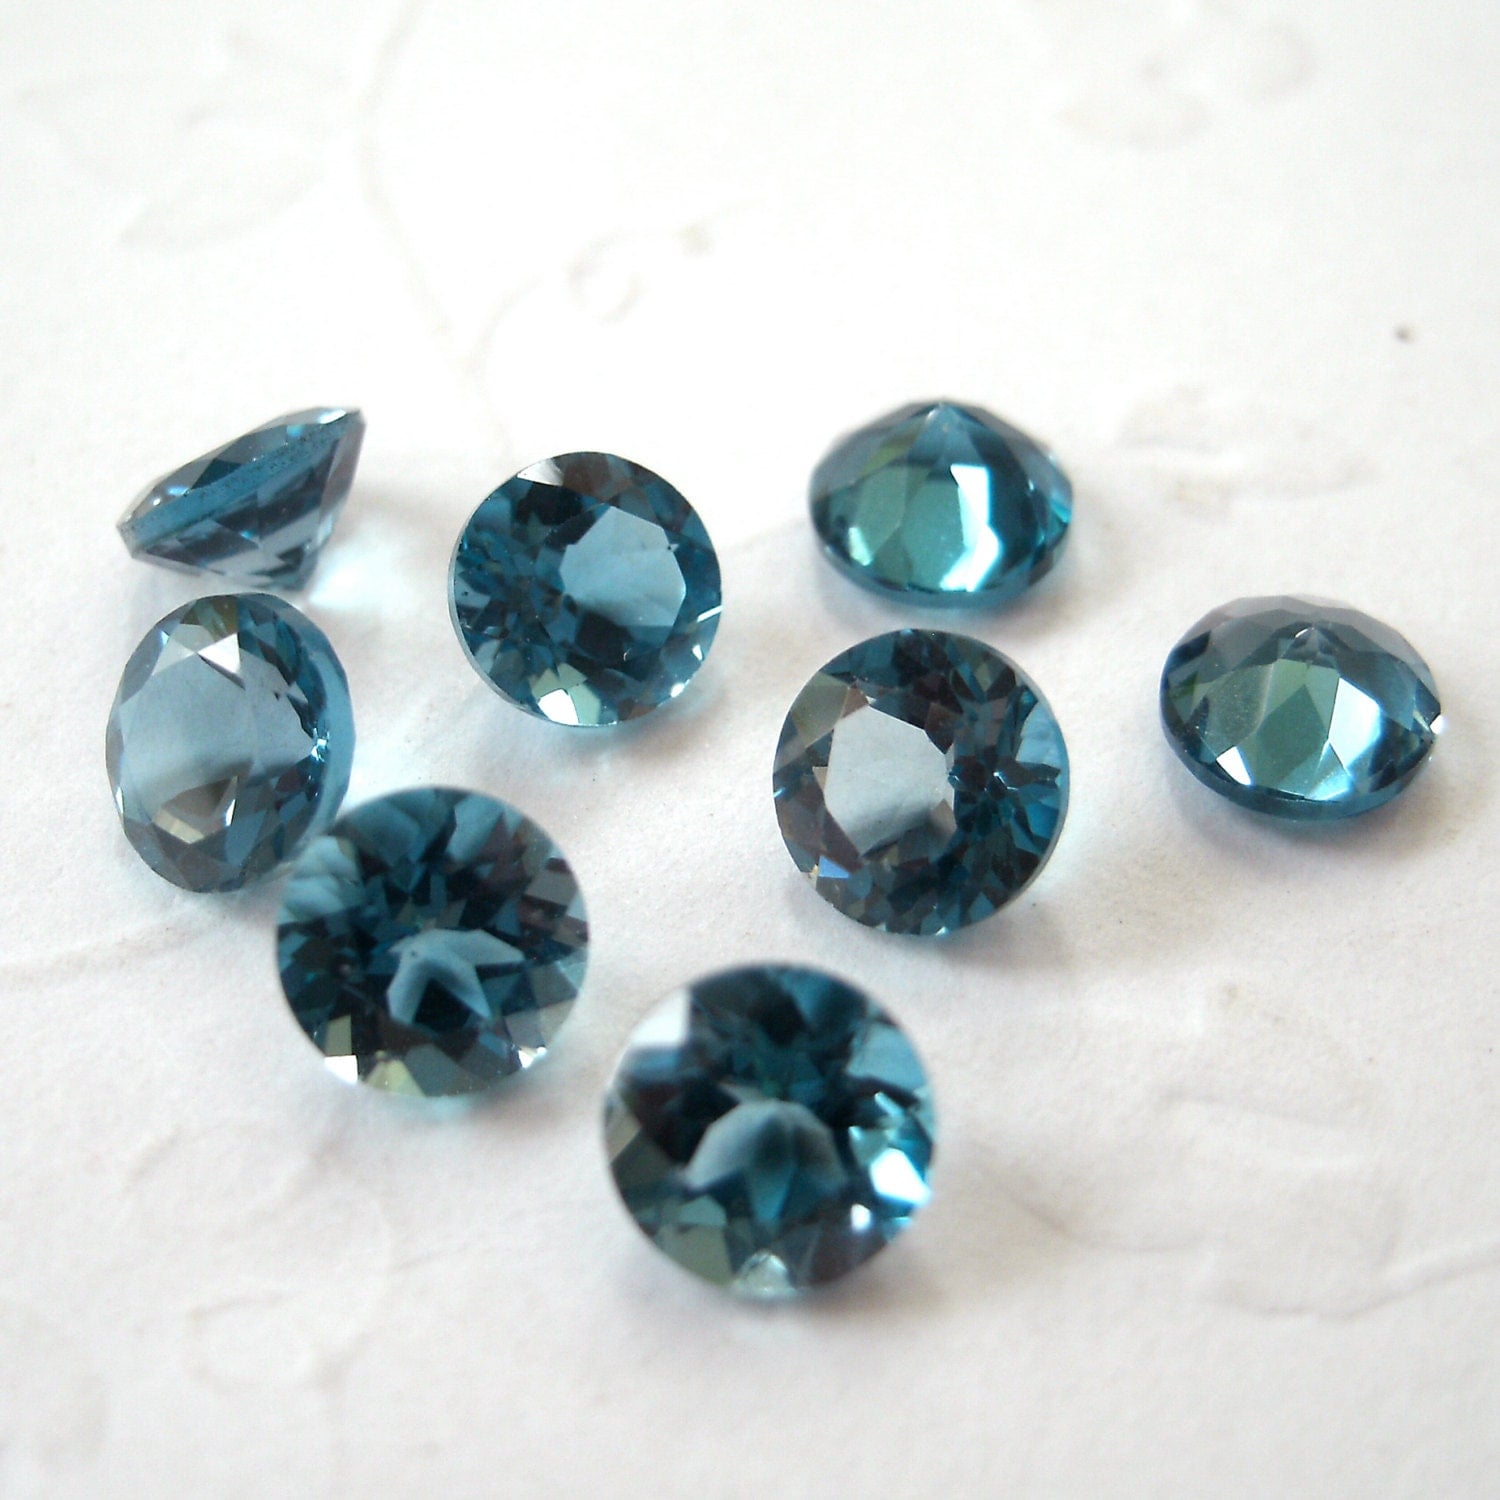 Faceted Gemstones London Blue Topaz Brilliant Cut Aaa 4mm For